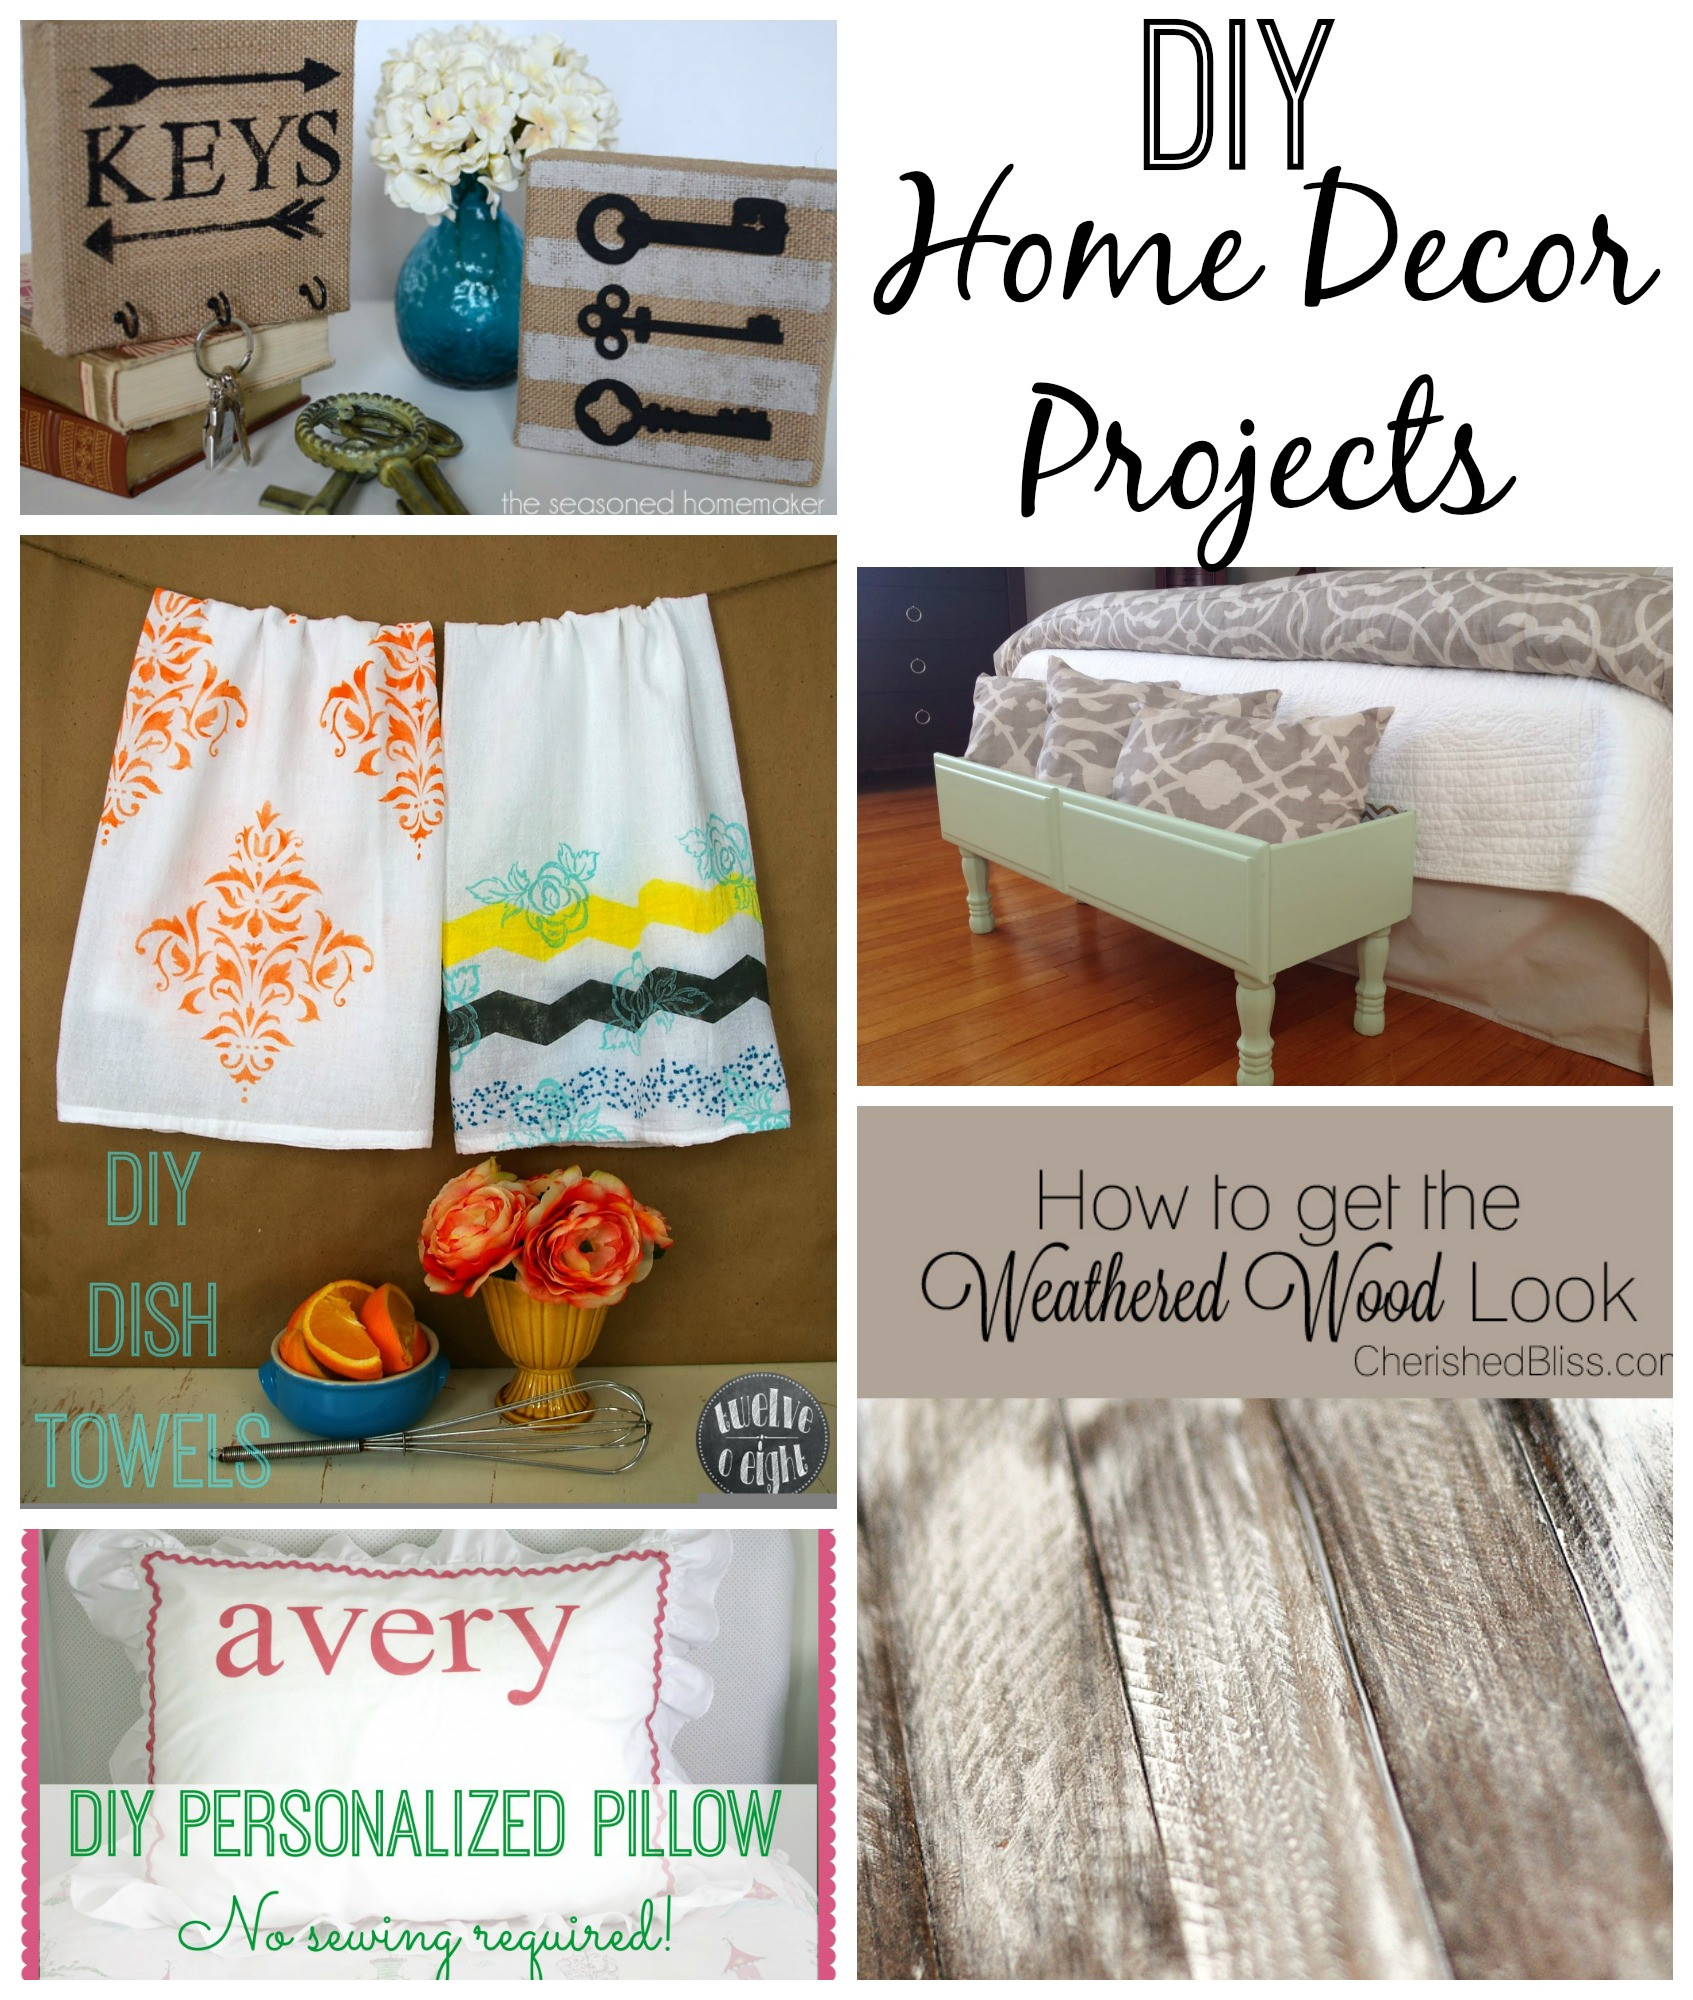 DIY Project Home Decor
 DIY Home Decor Projects